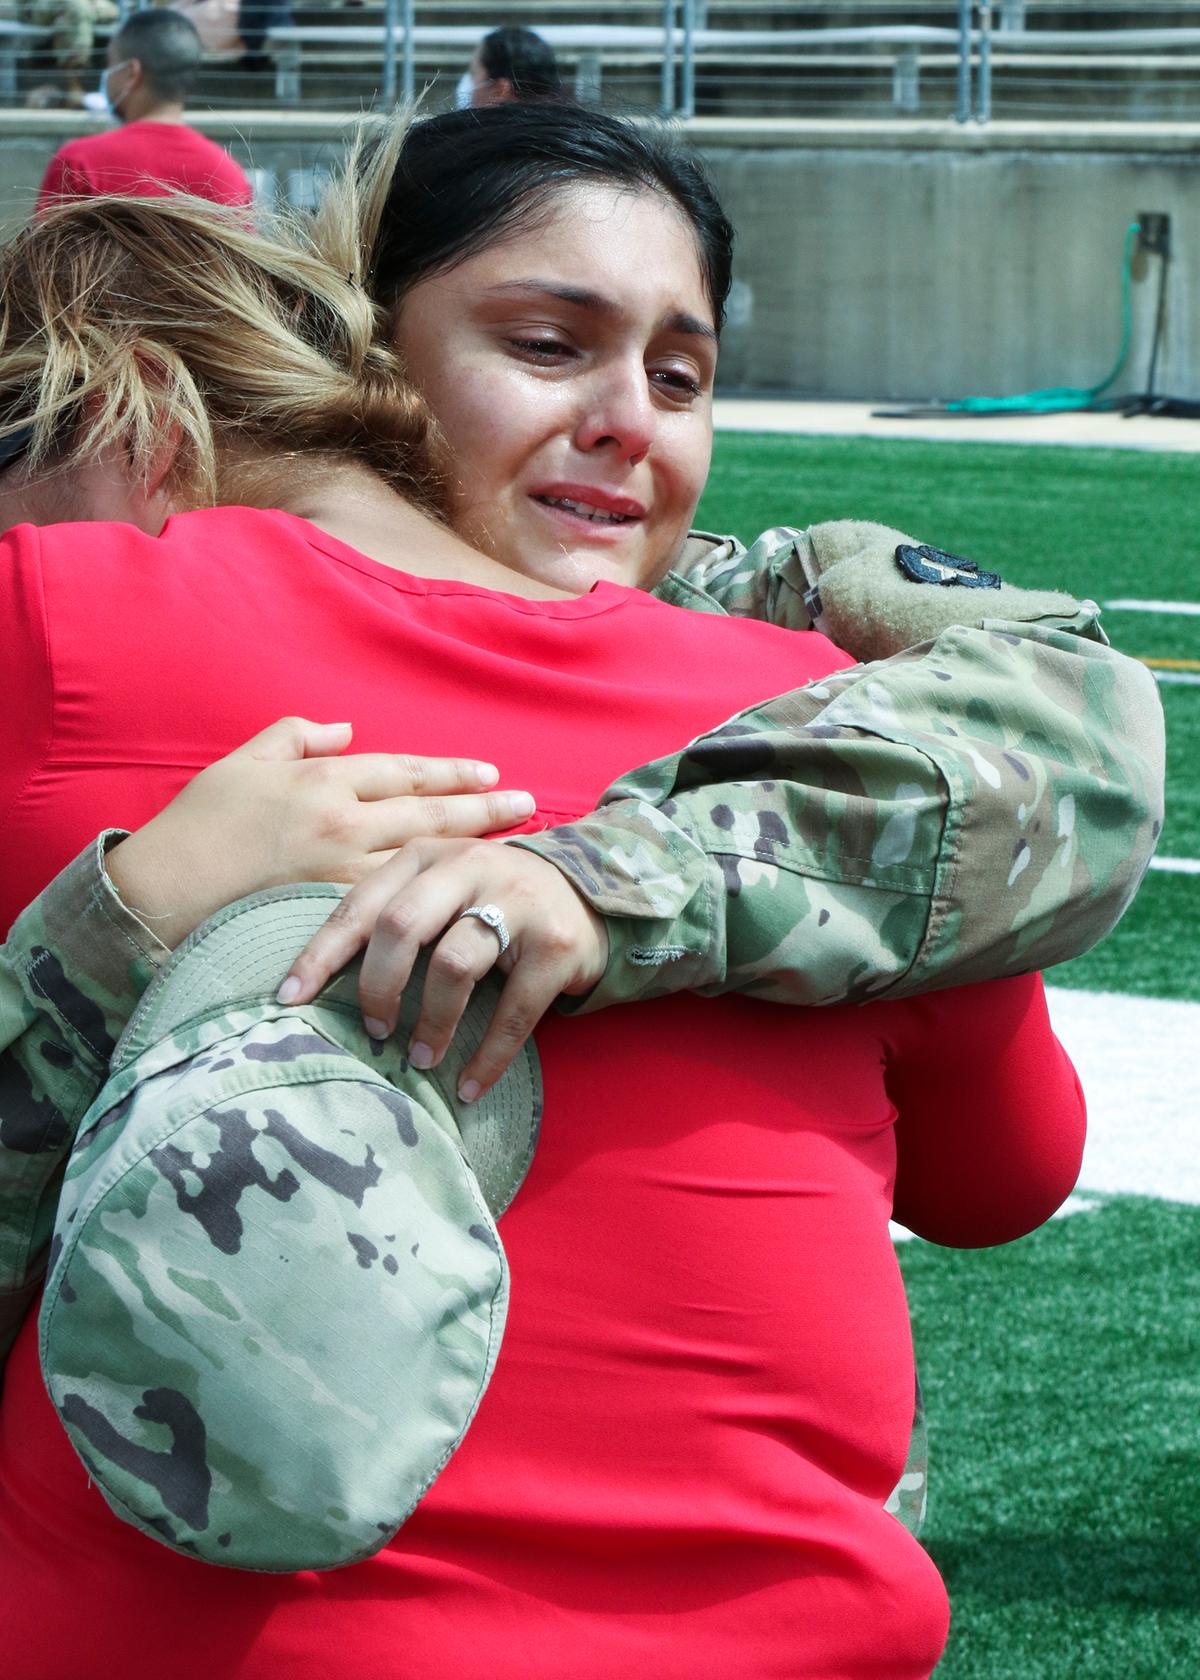 (<a href="https://www.dvidshub.net/image/6371411/36th-infantry-division-deployment-casing-ceremony">Staff Sgt. Michael Giles</a>/36th Infantry Division Public Affairs/U.S. Army)